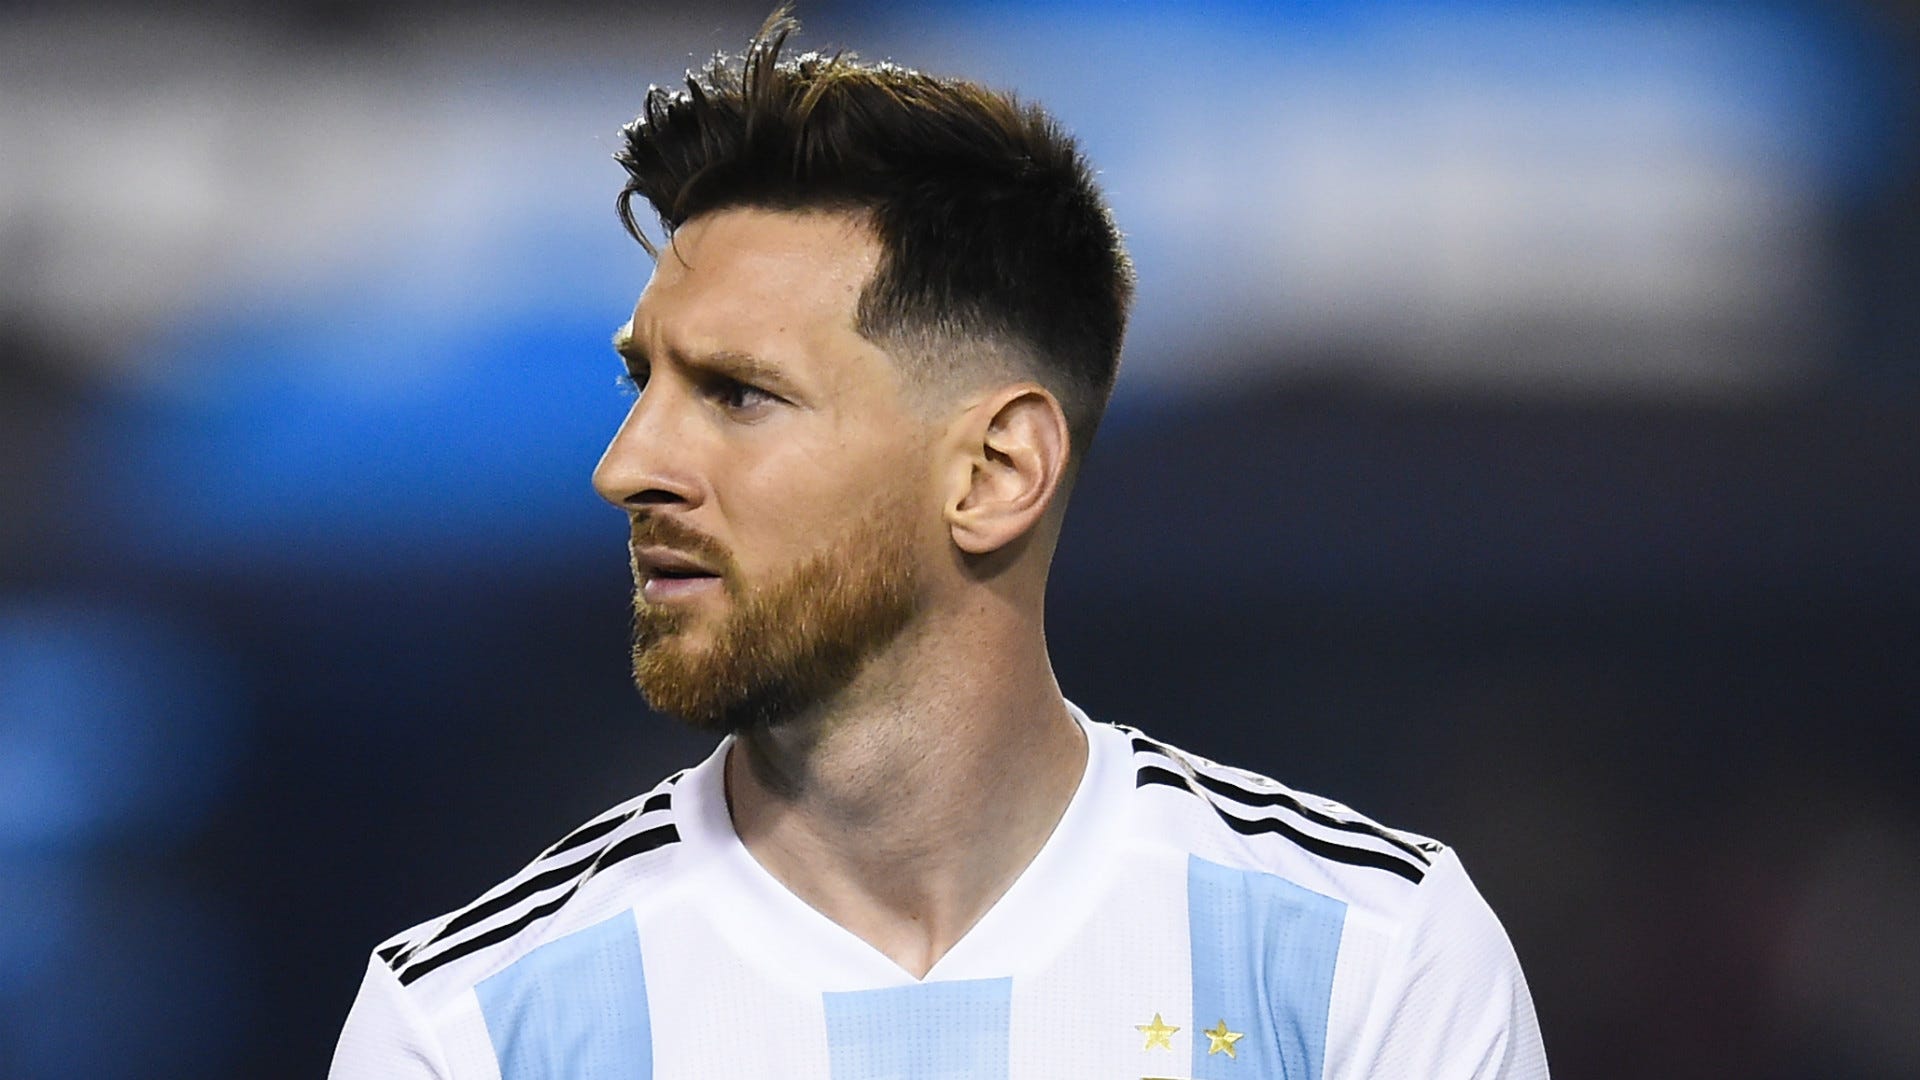 Barber snips Lionel Messi 'headshot' for fans ahead of FIFA World Cup 2018  | Football News - Hindustan Times